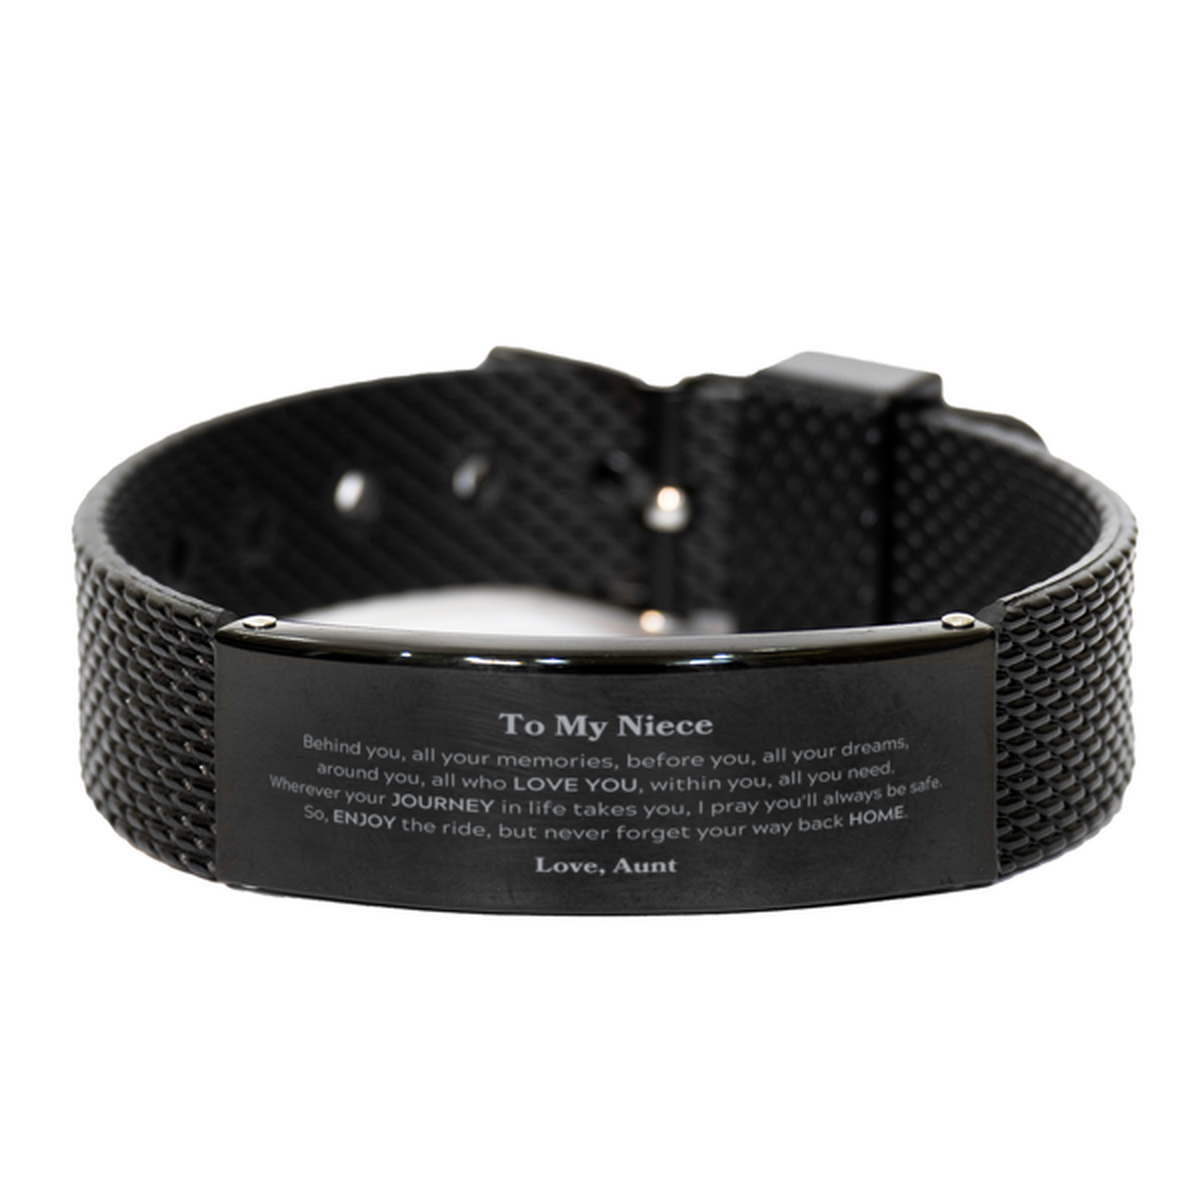 To My Niece Graduation Gifts from Aunt, Niece Black Shark Mesh Bracelet Christmas Birthday Gifts for Niece Behind you, all your memories, before you, all your dreams. Love, Aunt